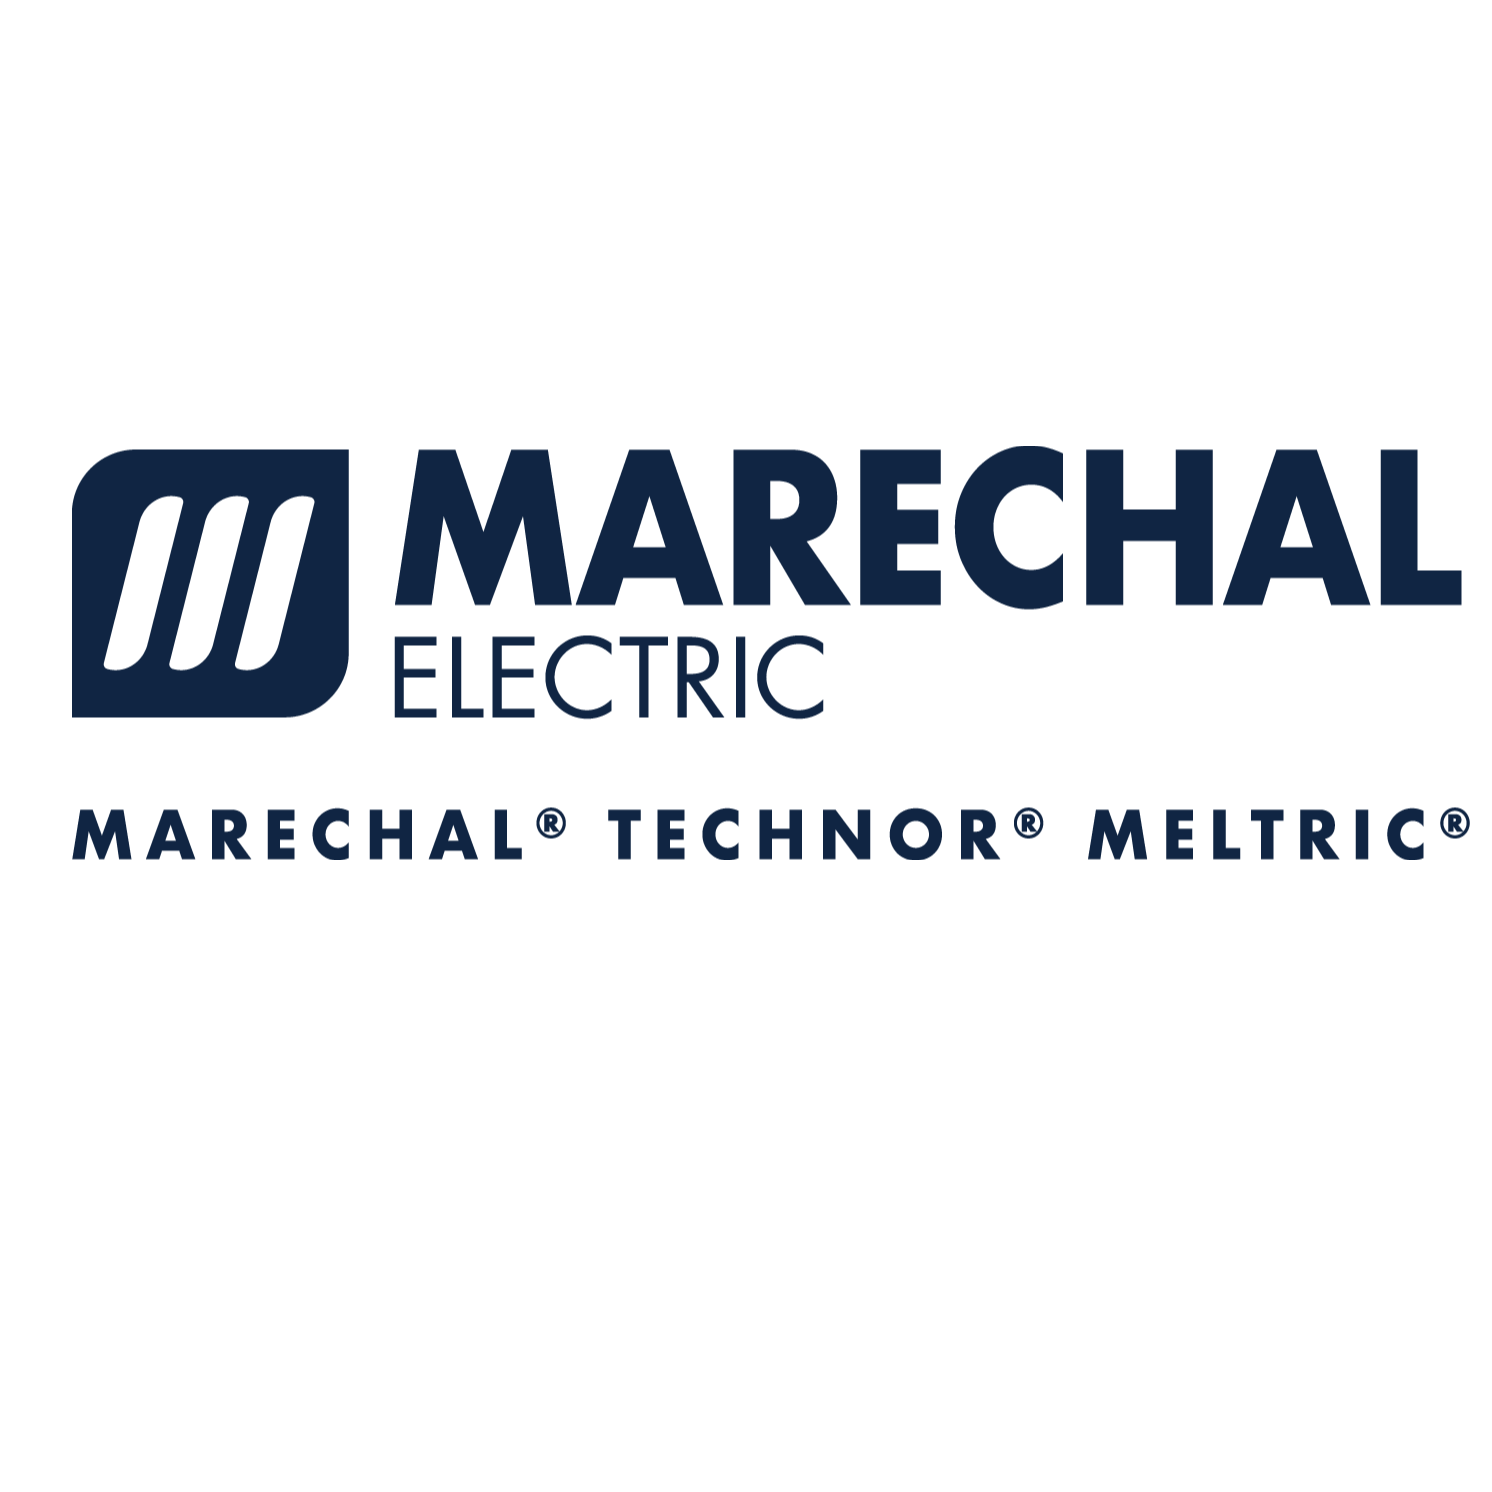 MARECHAL ELECTRIC S.A.S.